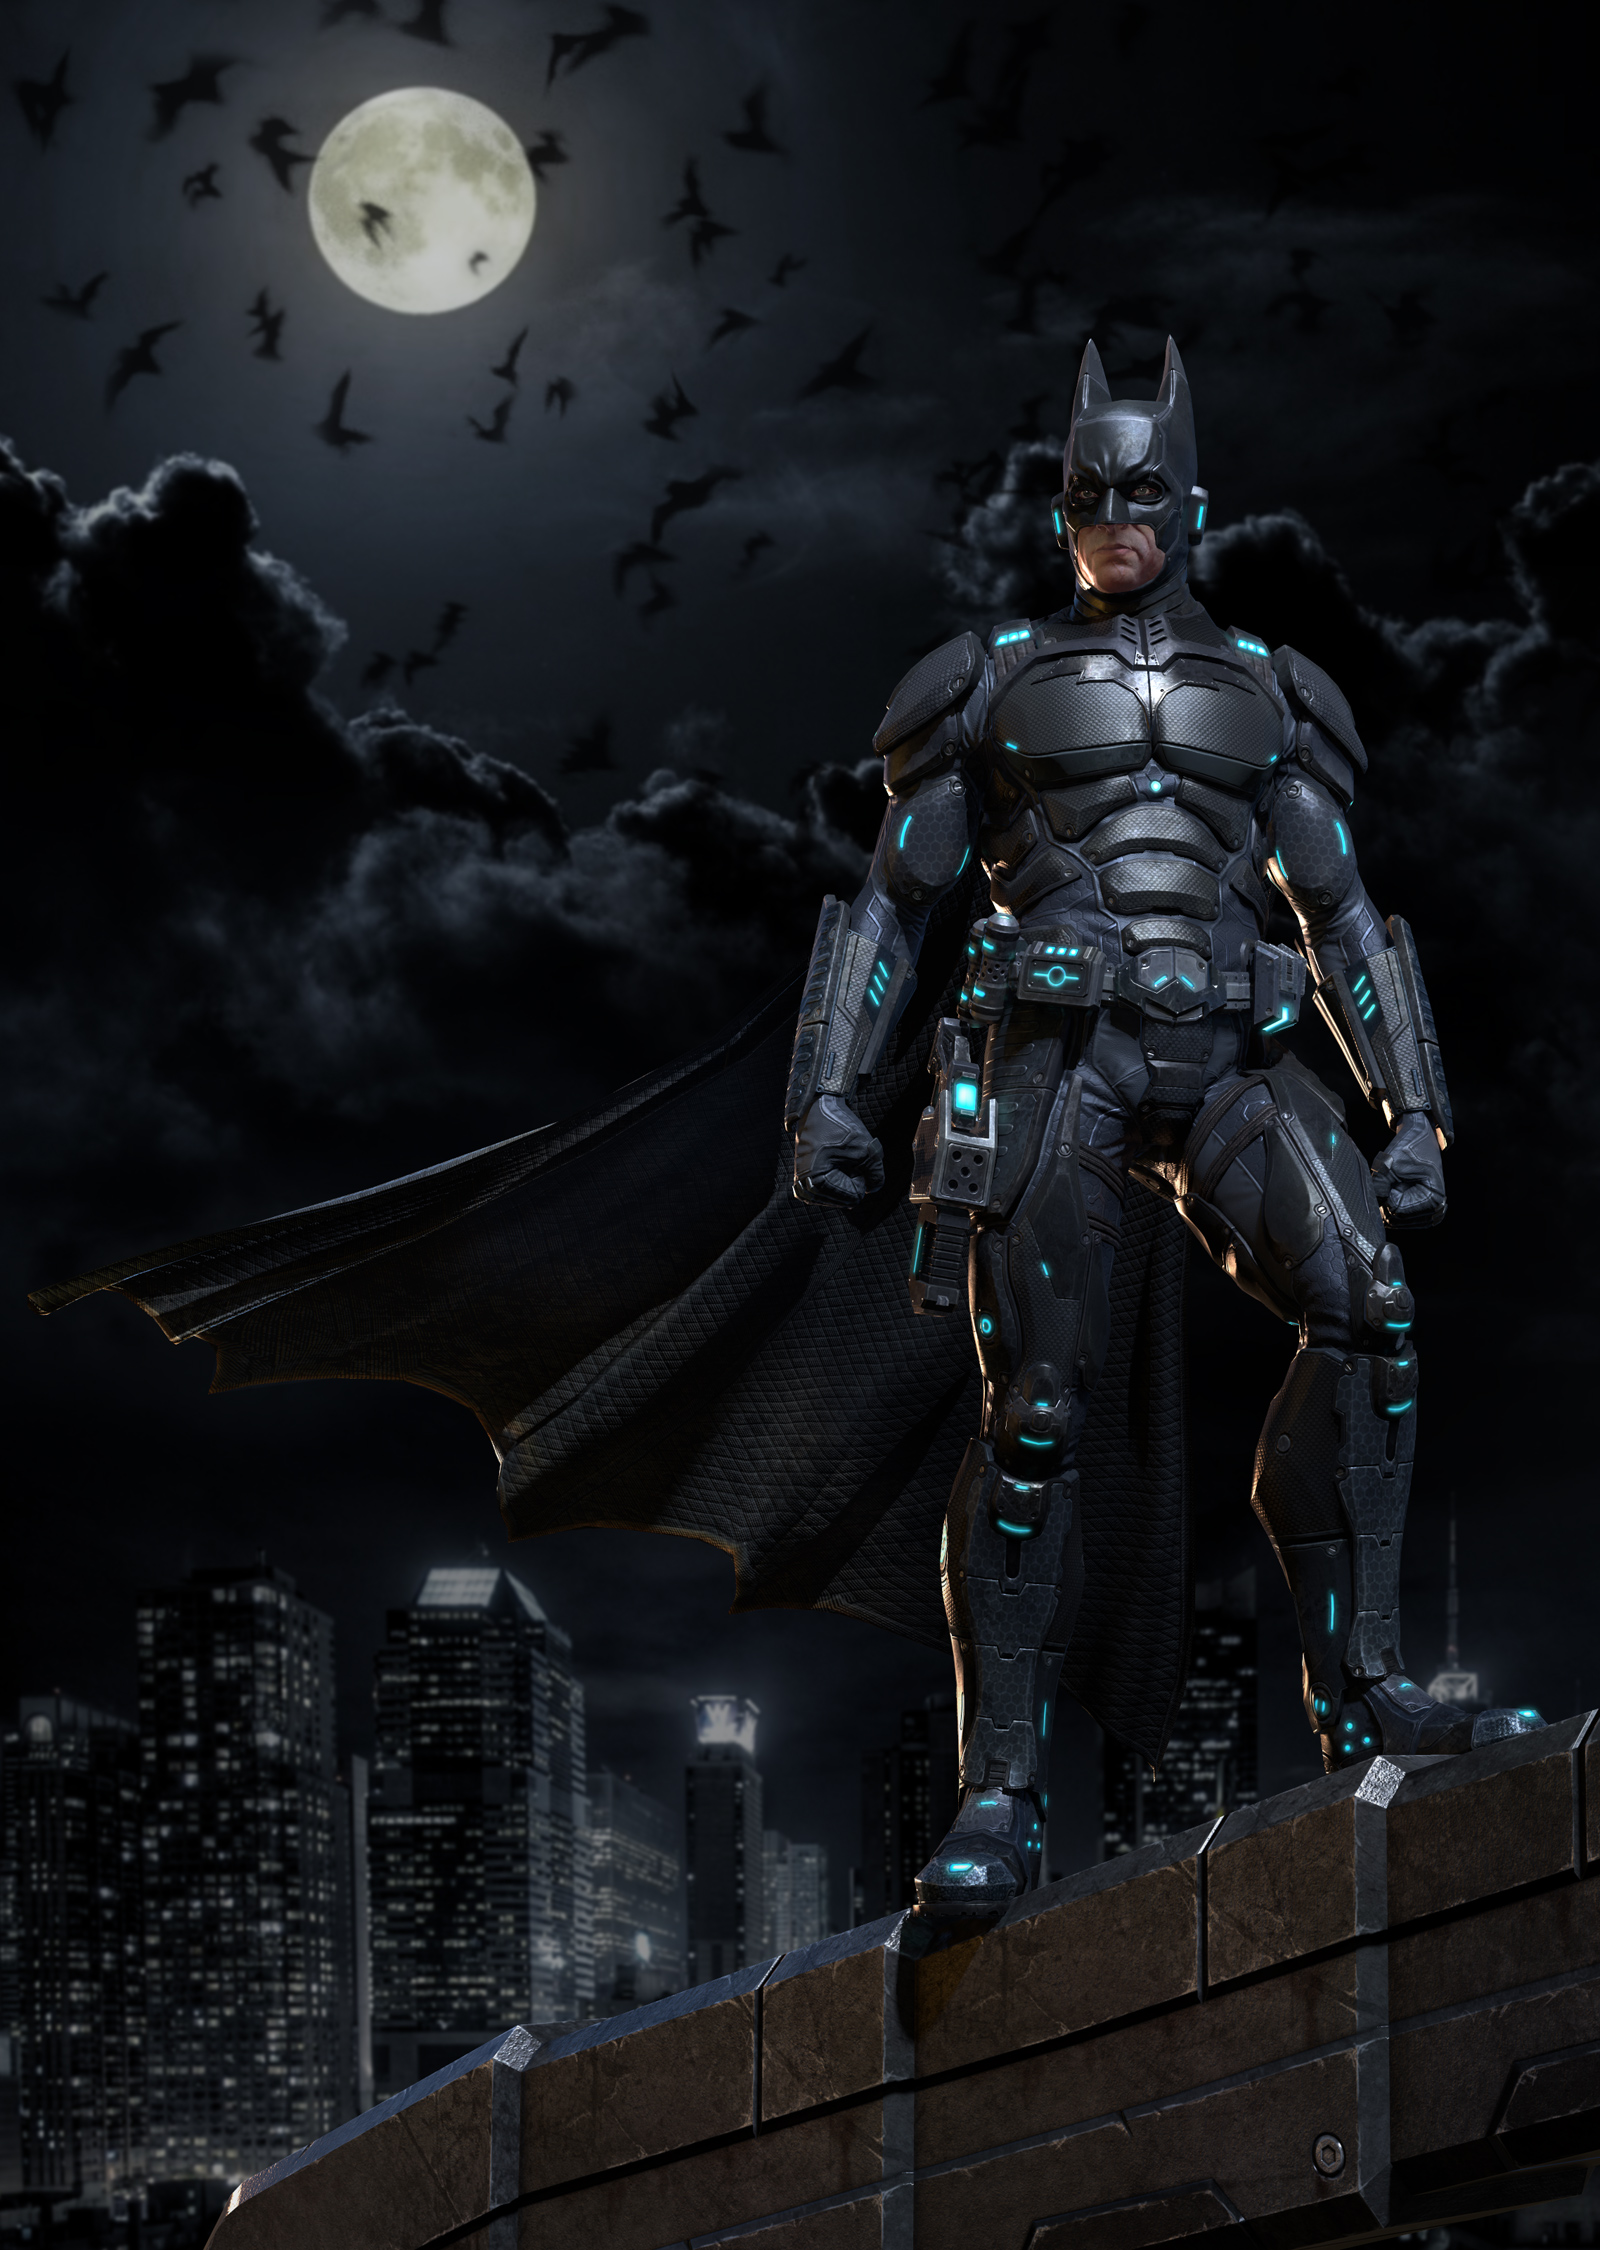 Future Batman Glows In The Dark (And Is Really Old)